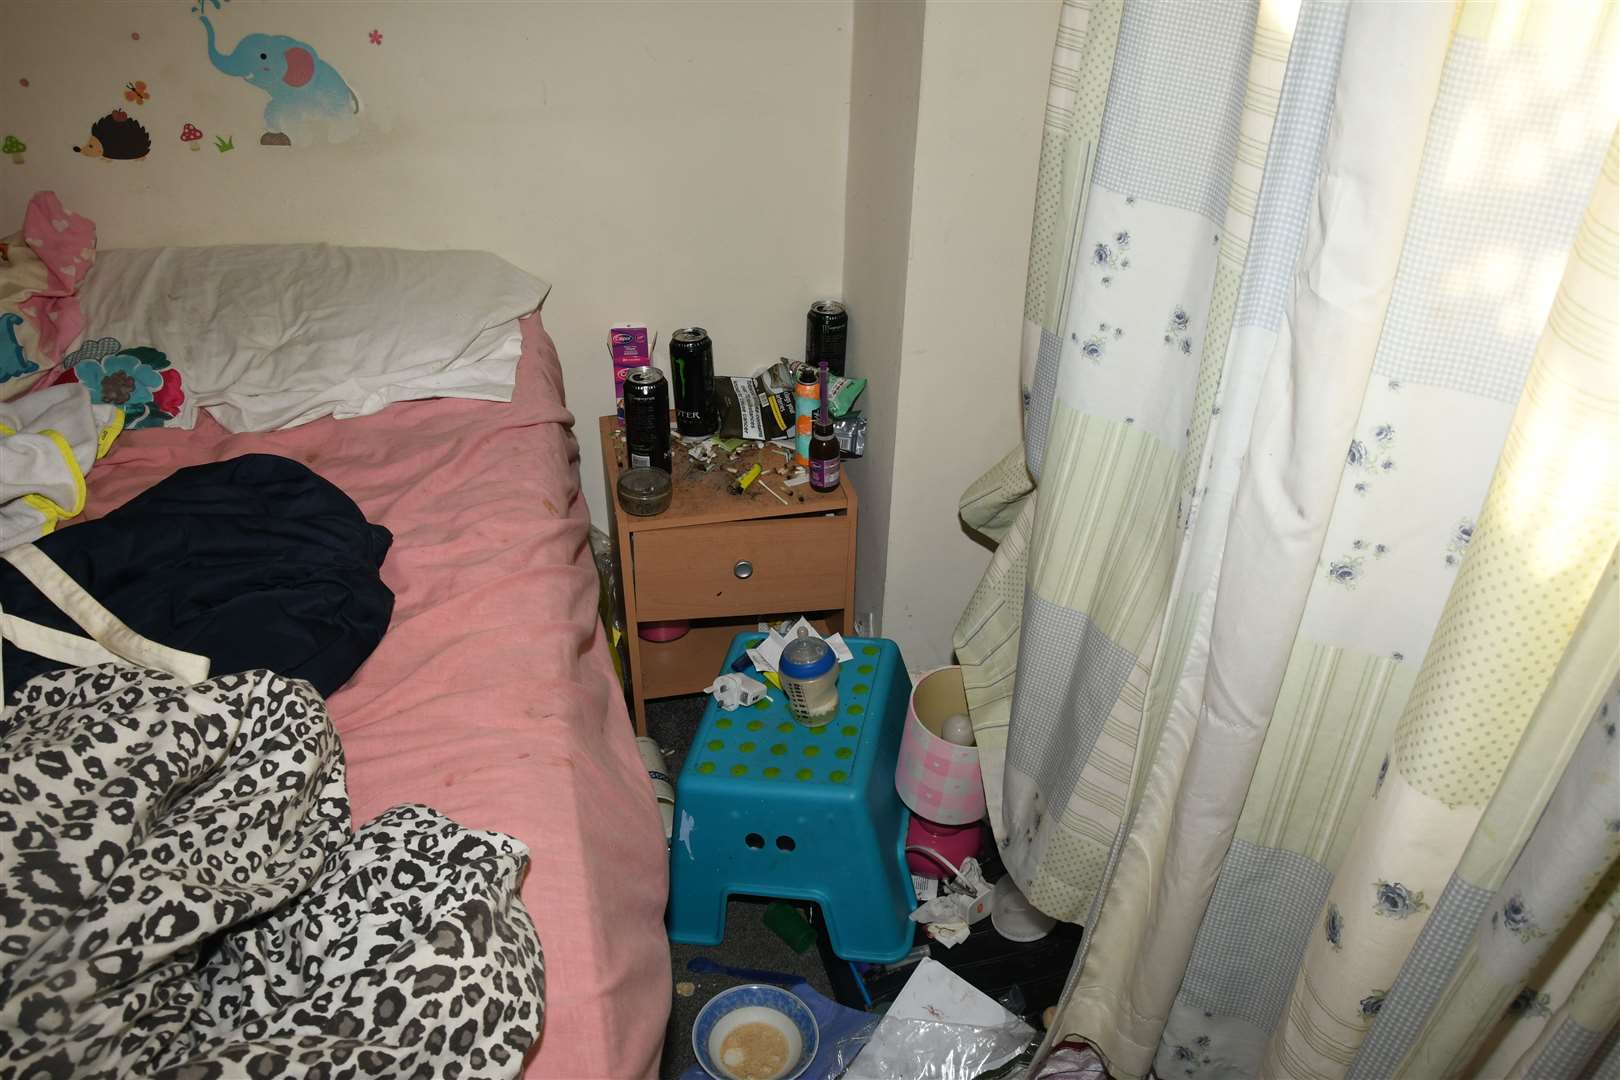 Boden and Marsden lived in chaos, with clutter and filth in their bedroom (Derbyshire Police/PA)